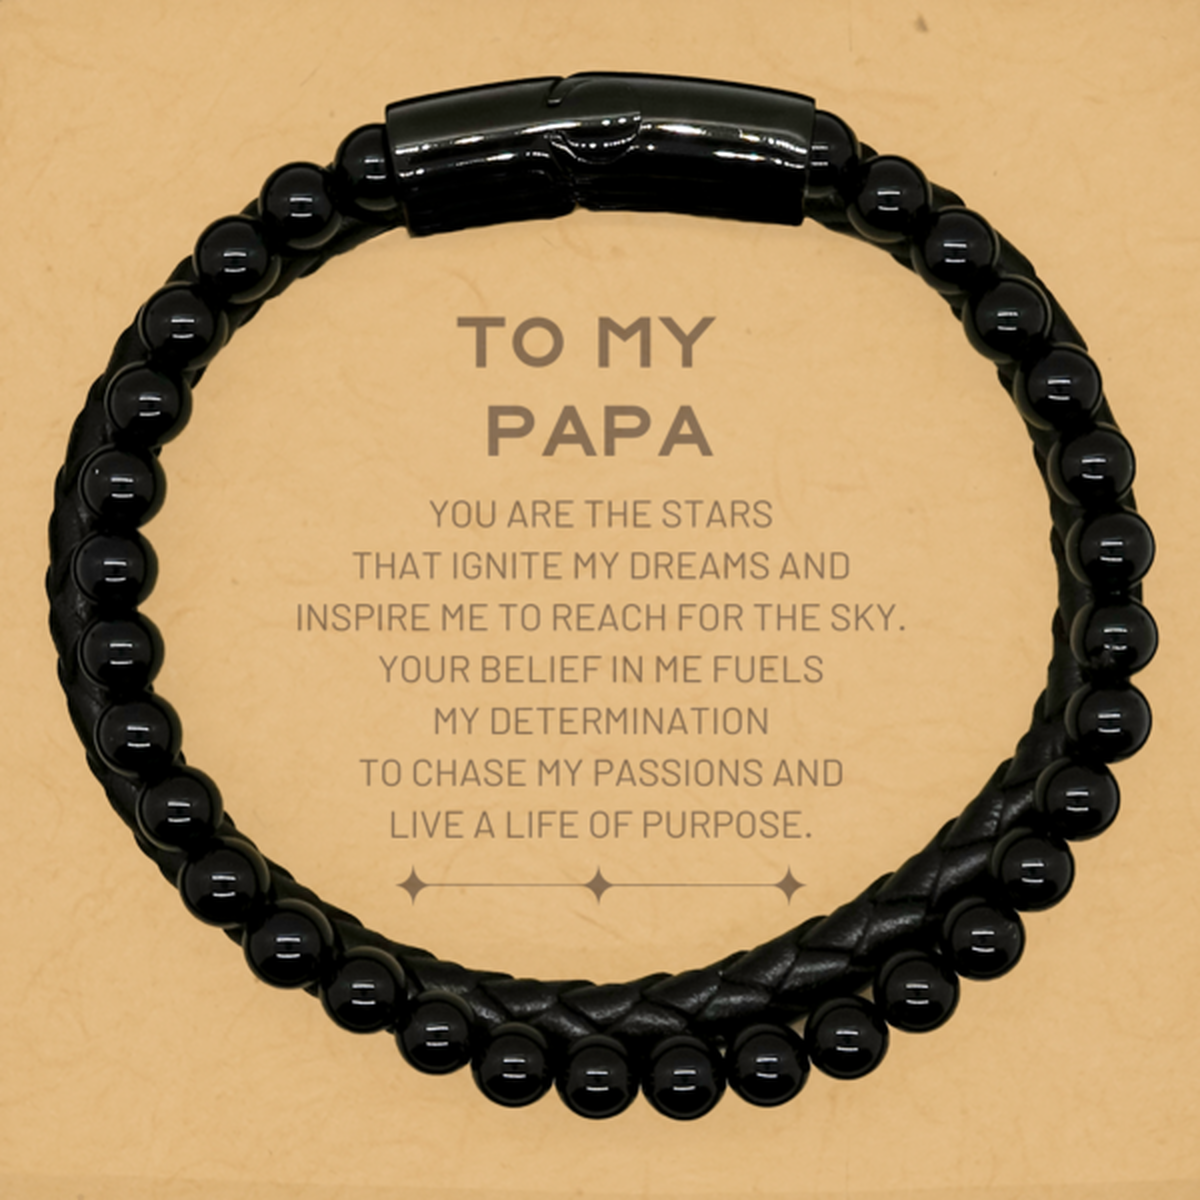 To My Papa Stone Leather Bracelets, You are the stars that ignite my dreams and inspire me to reach for the sky, Birthday Unique Gifts For Papa, Thank You Gifts For Papa